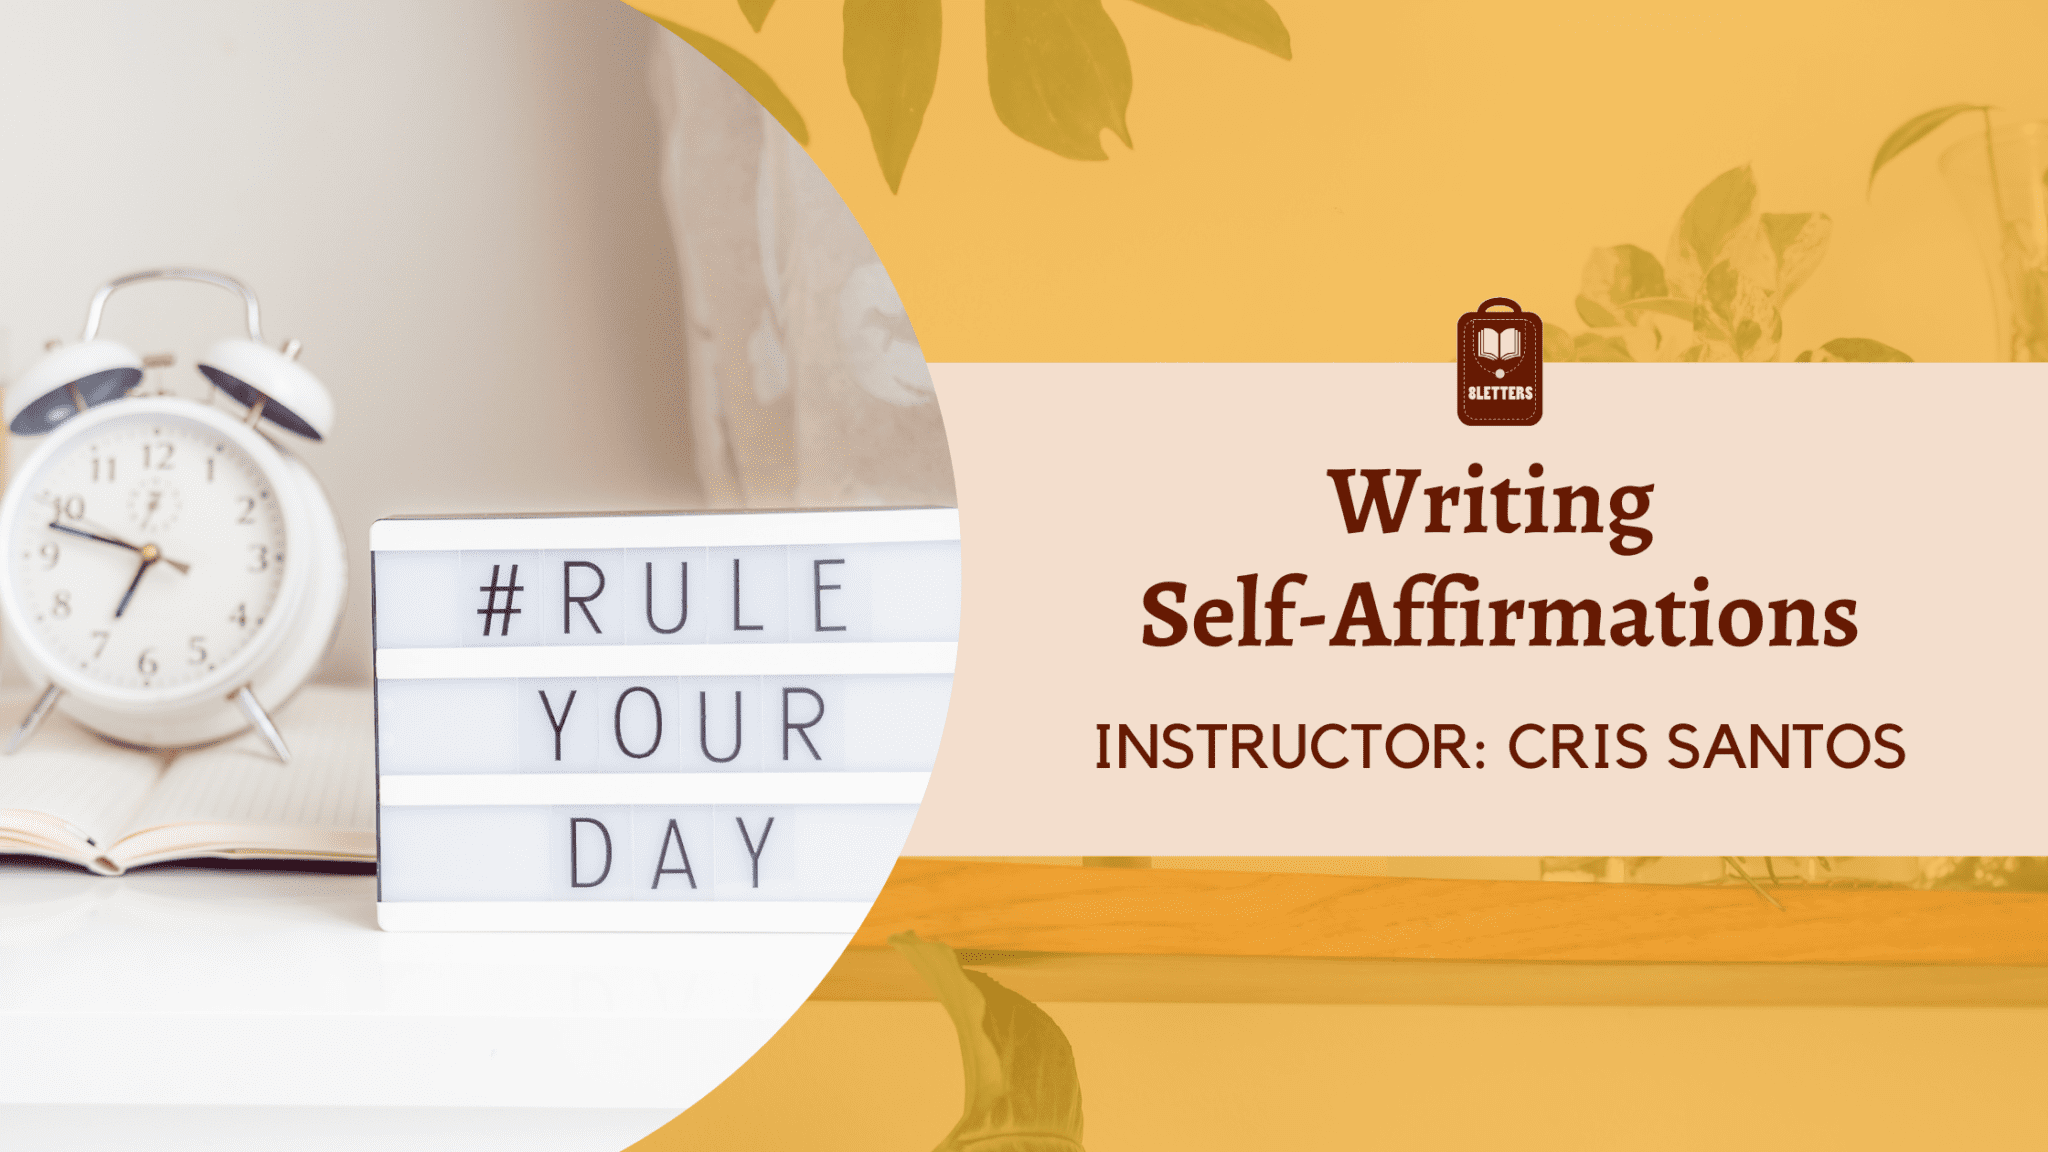 Writing Your Affirmations